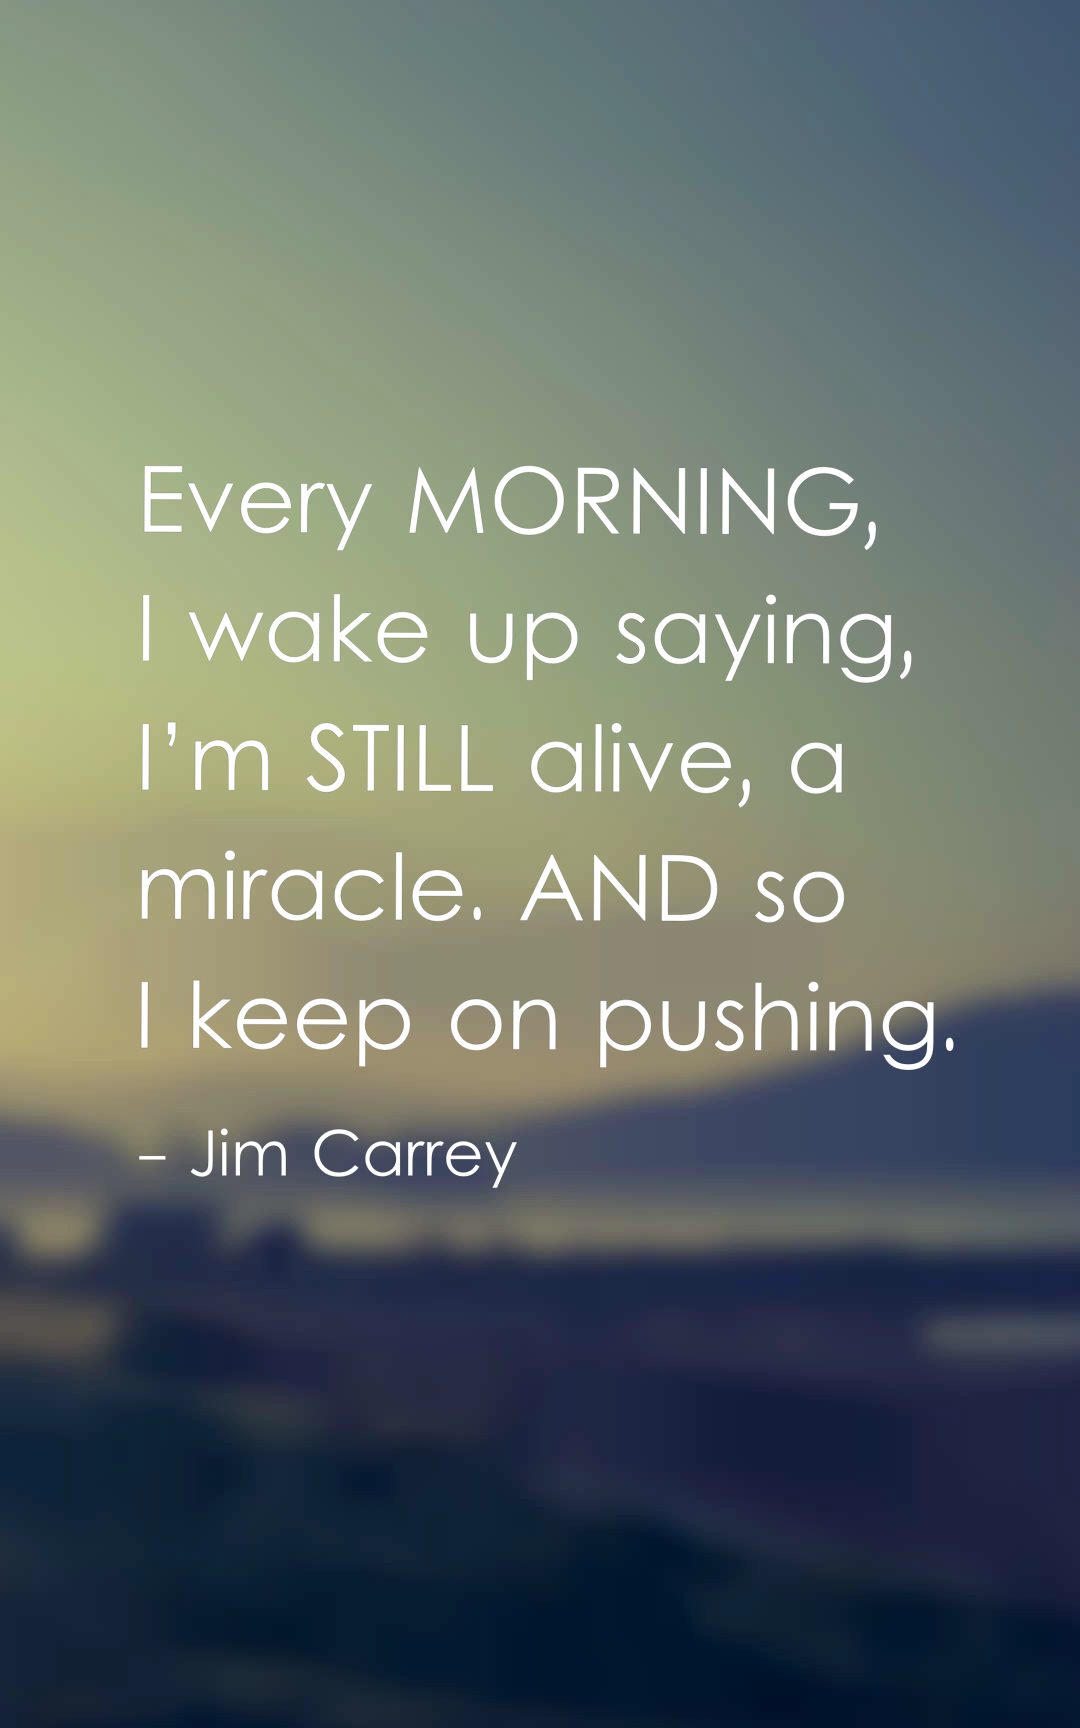 Every morning, I wake up saying, I’m still alive, a miracle. And so I keep on pushing.